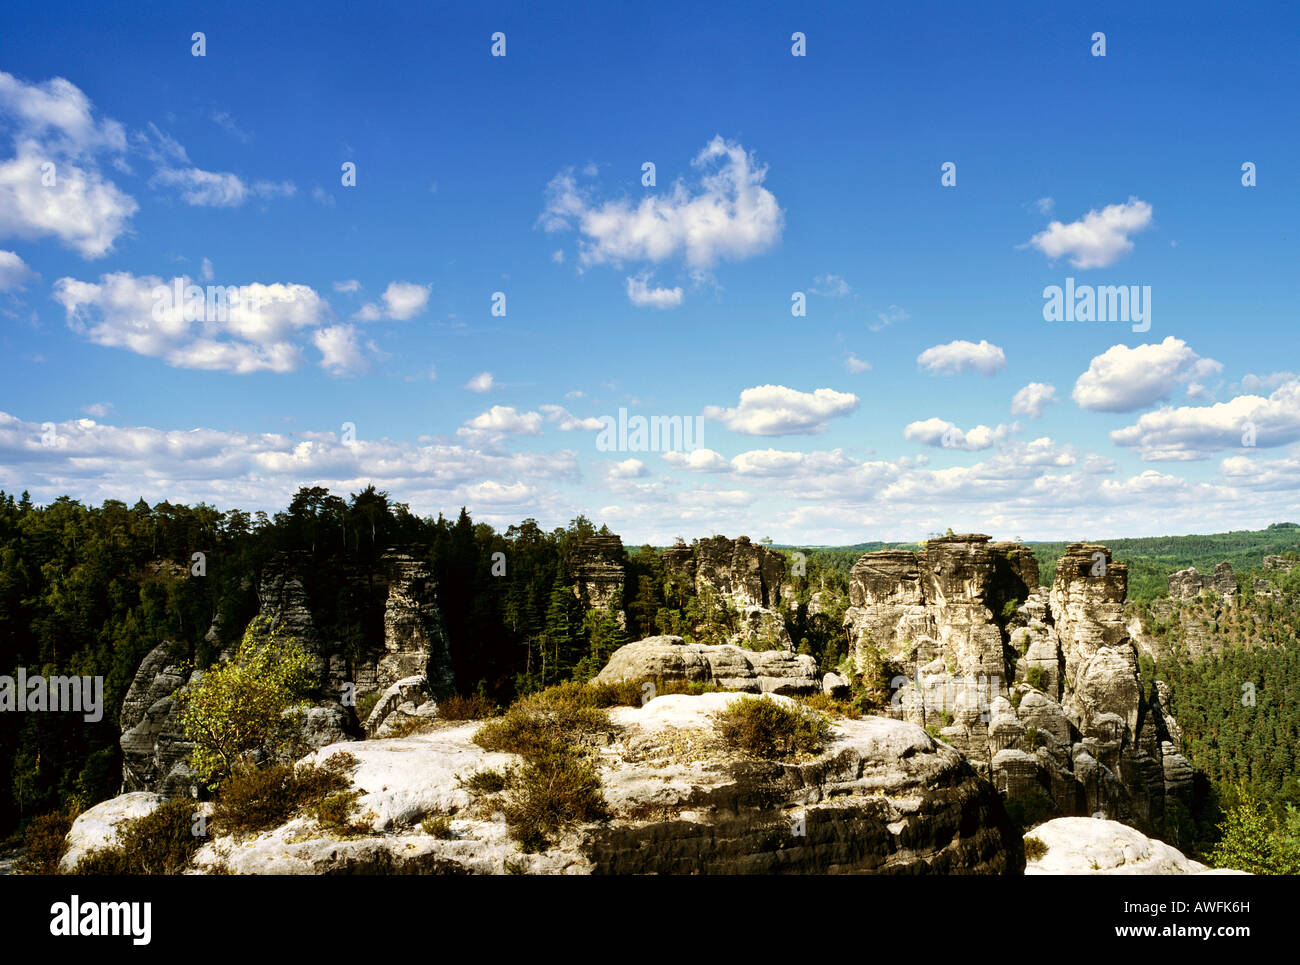 Rock formations in the Elbe Sandstone Mountains (German: Elbsandsteingebirge) also known as Saxon Switzerland, Saxony, Germany, Stock Photo